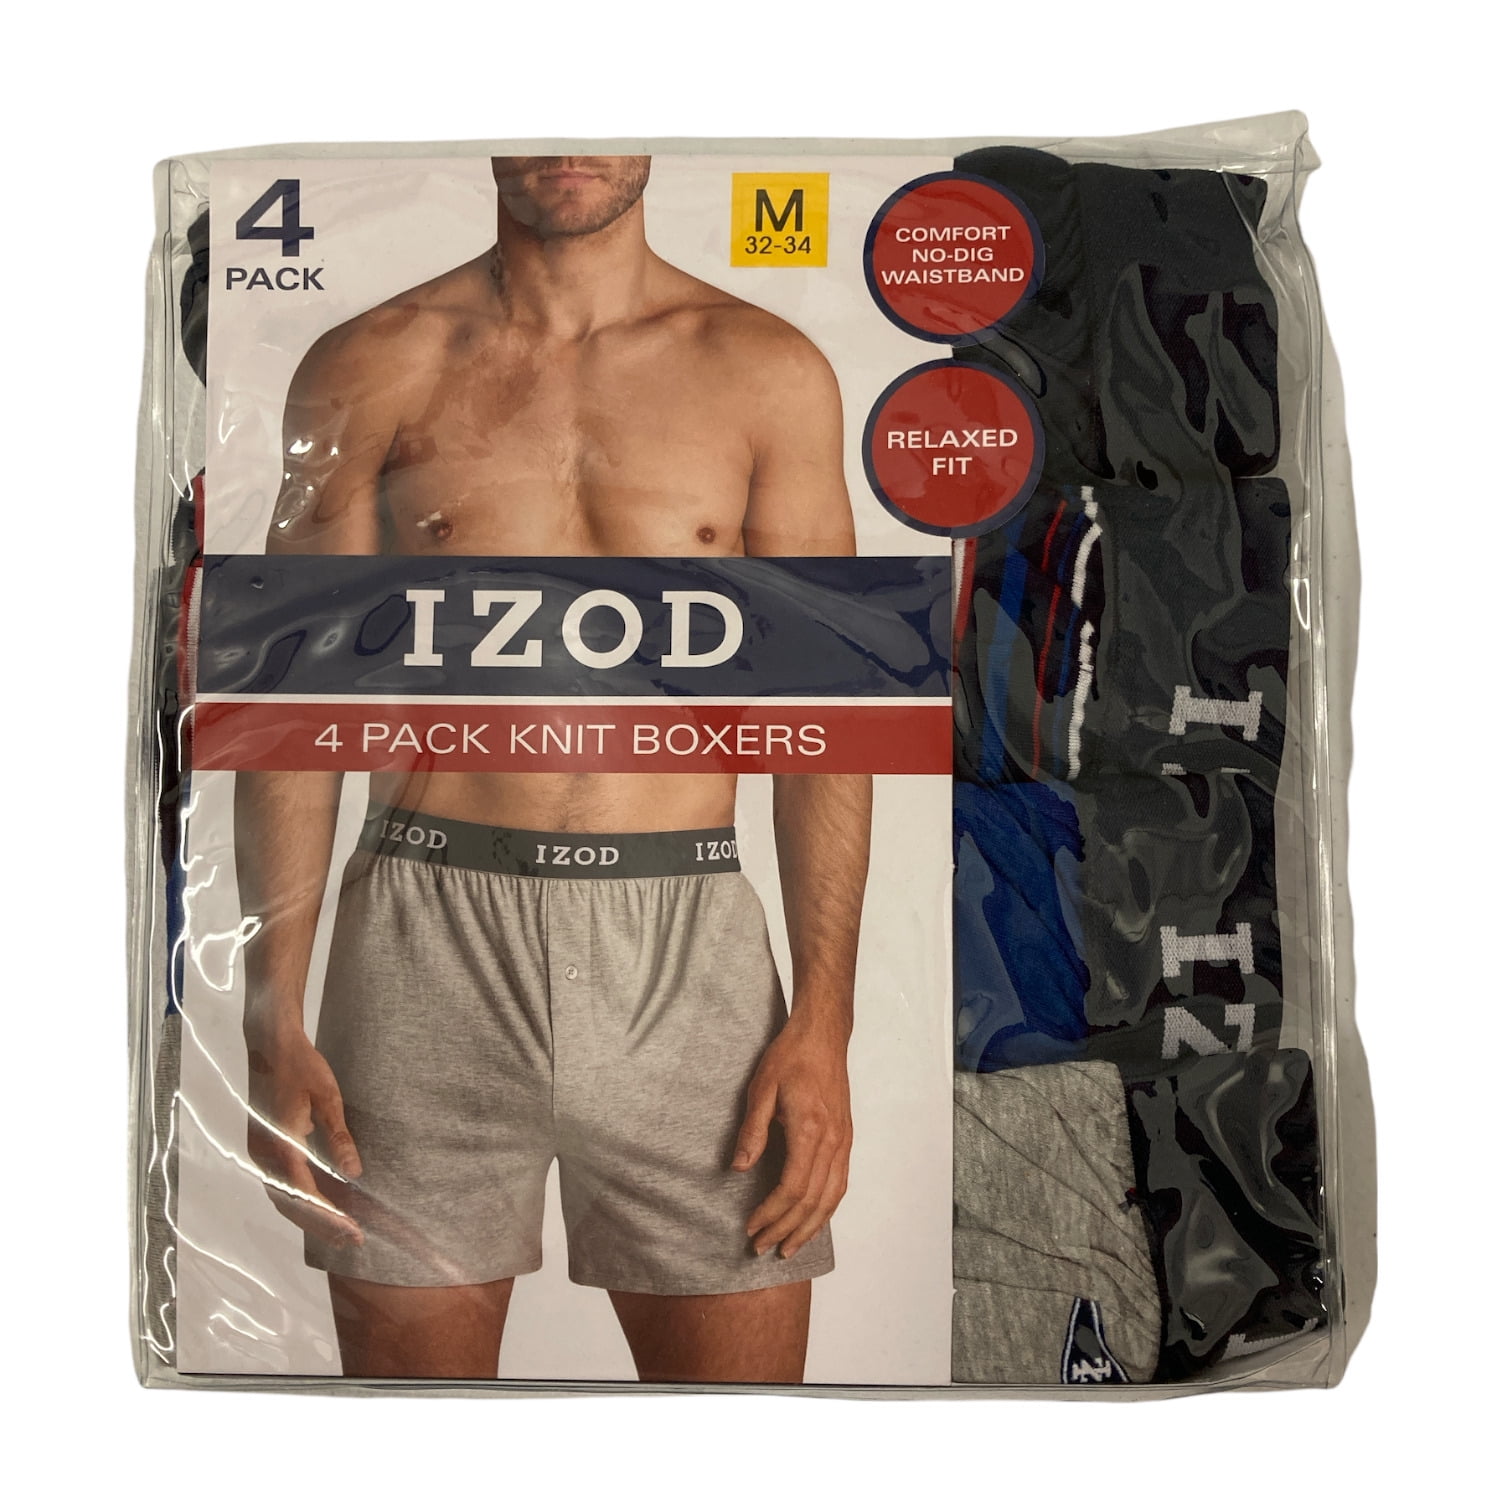 Izod Men's Soft Relaxed Fit Comfort Waistband Knit Boxers, 4 Pack (Navy ...